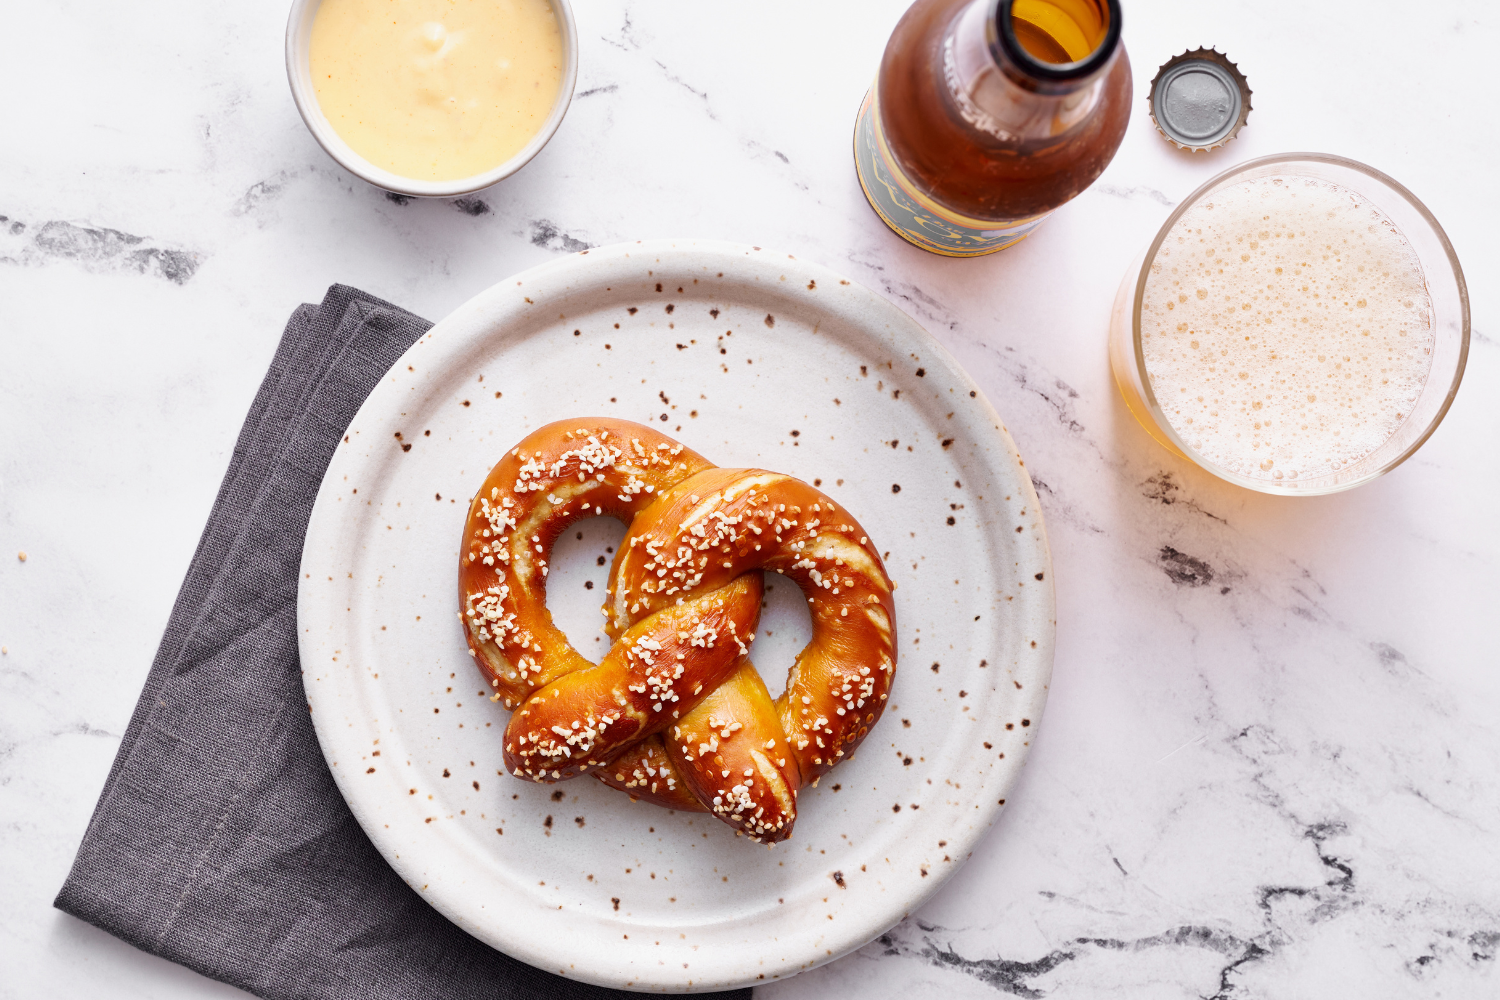 a fresh soft pretzel with coarse salt on a plate, with a side of beer cheese and a bottle of beer